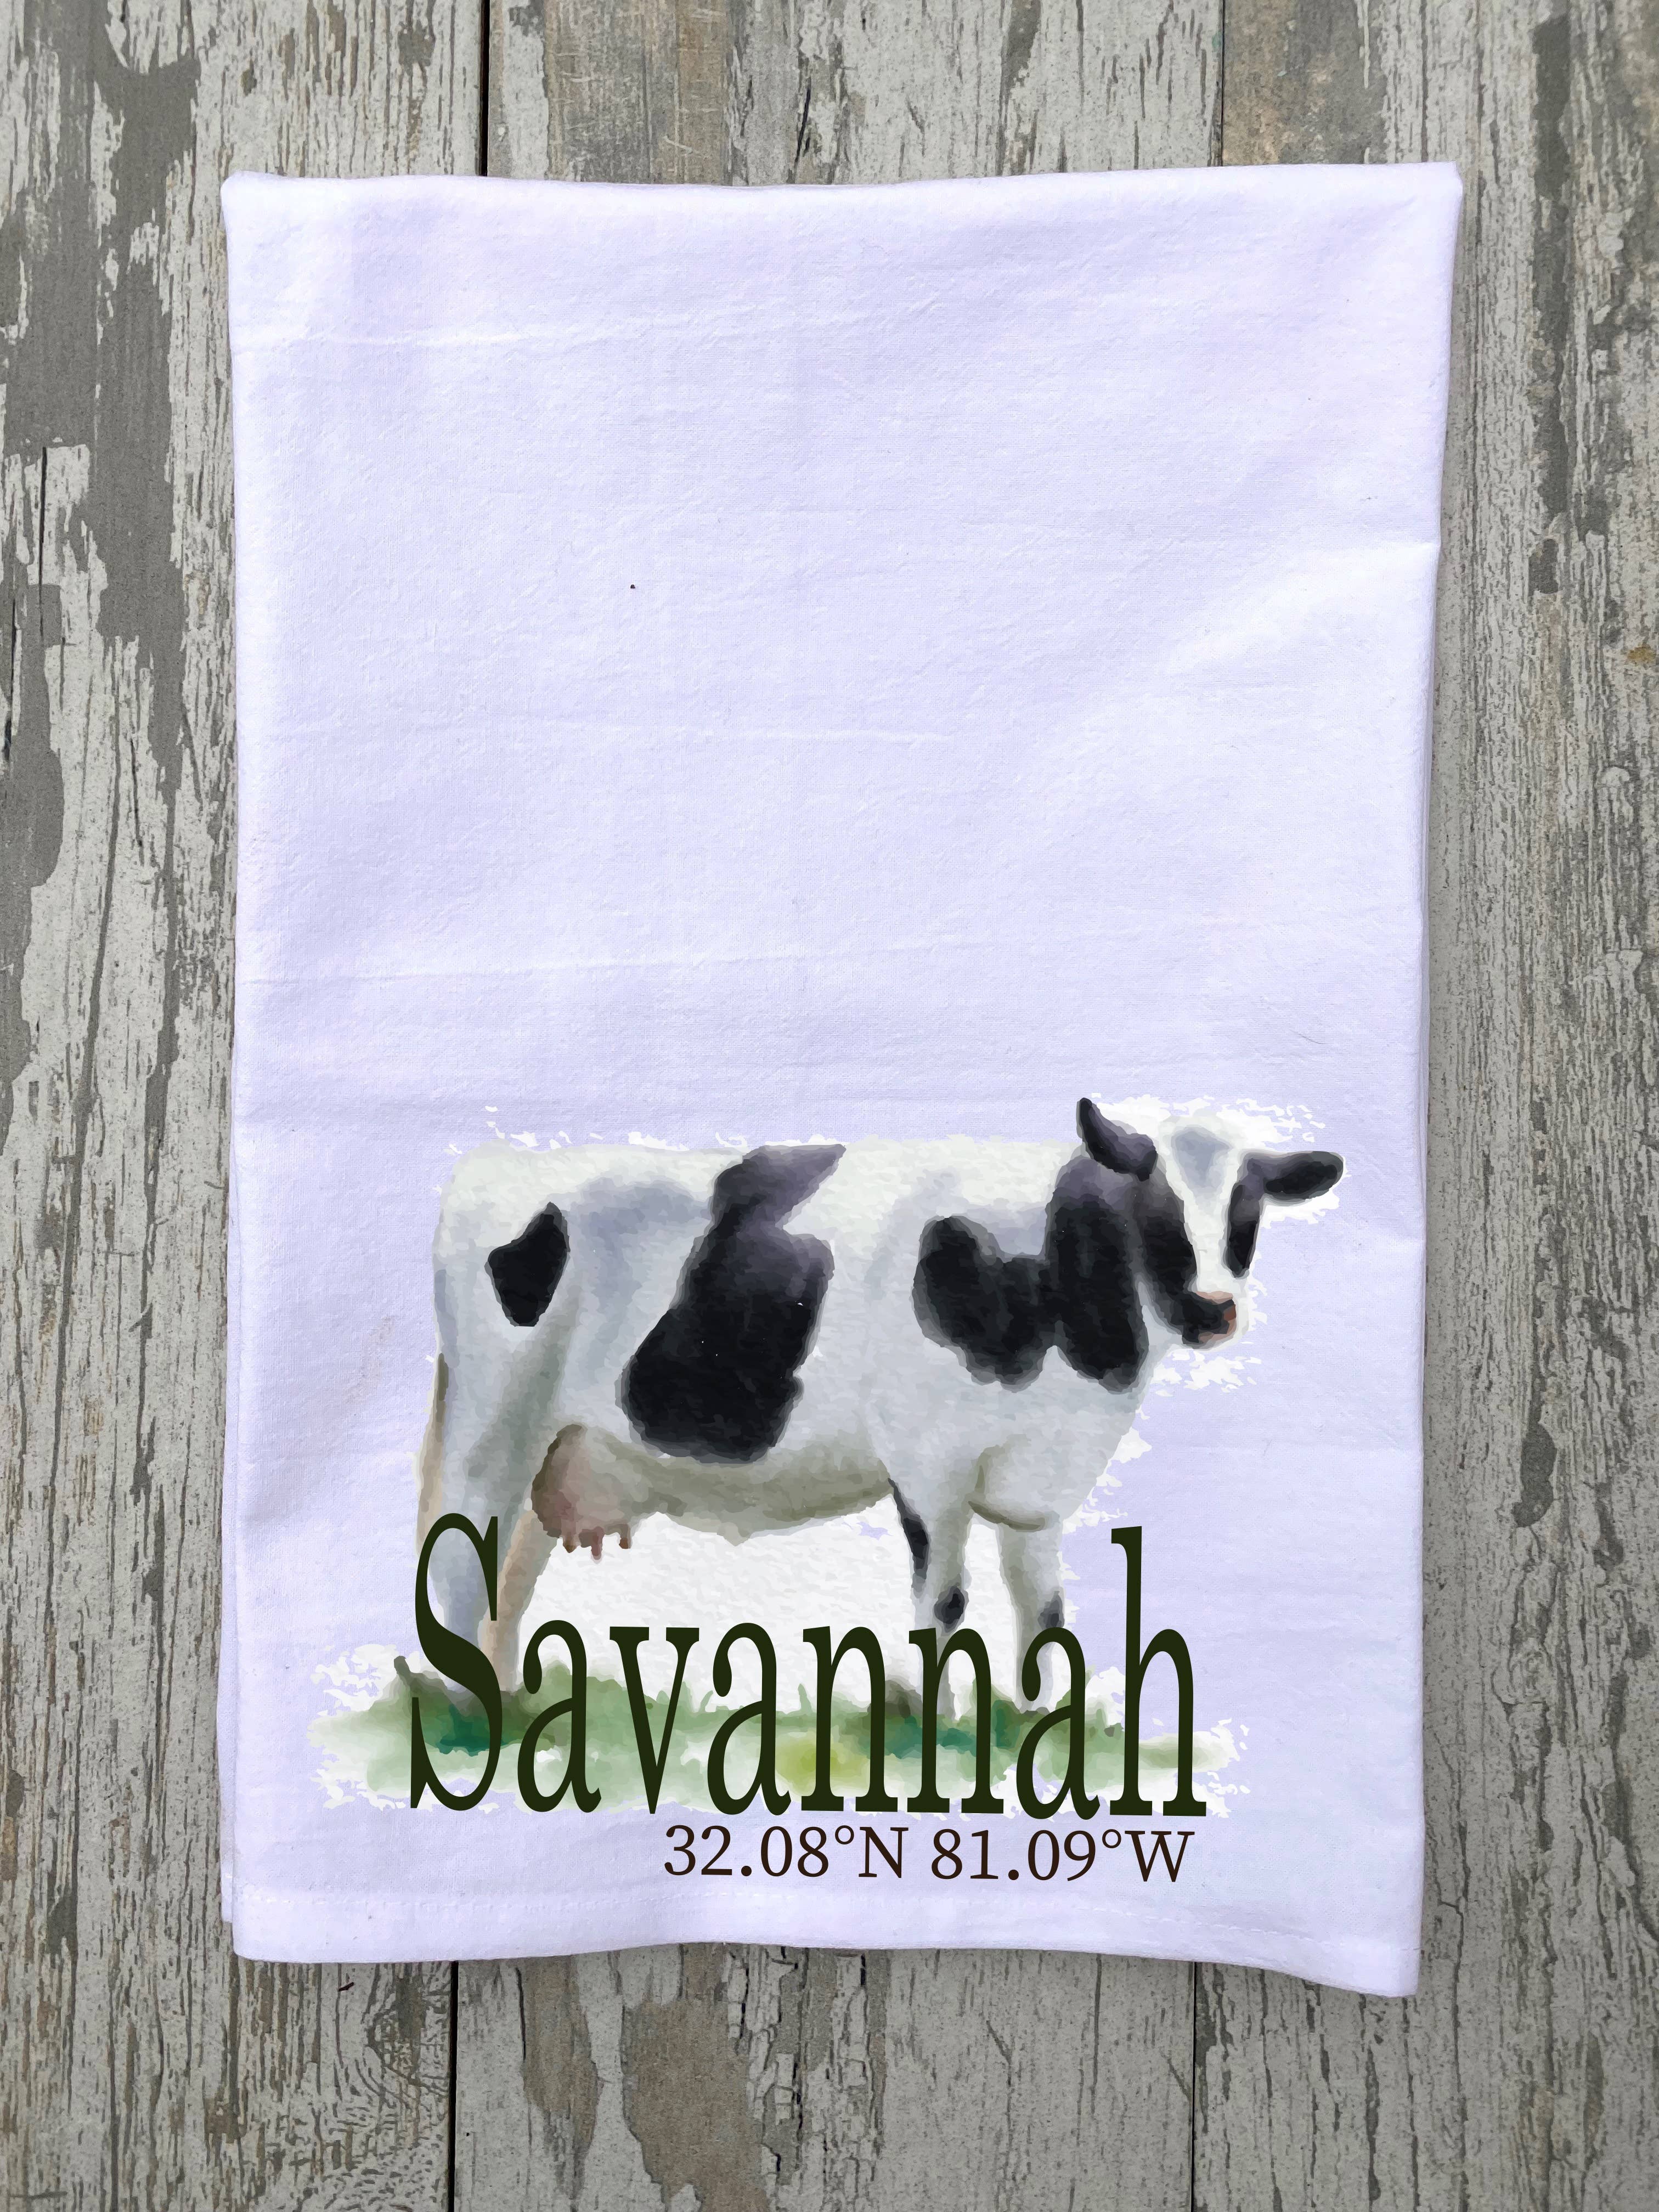 Cattle Brands Dish Towel